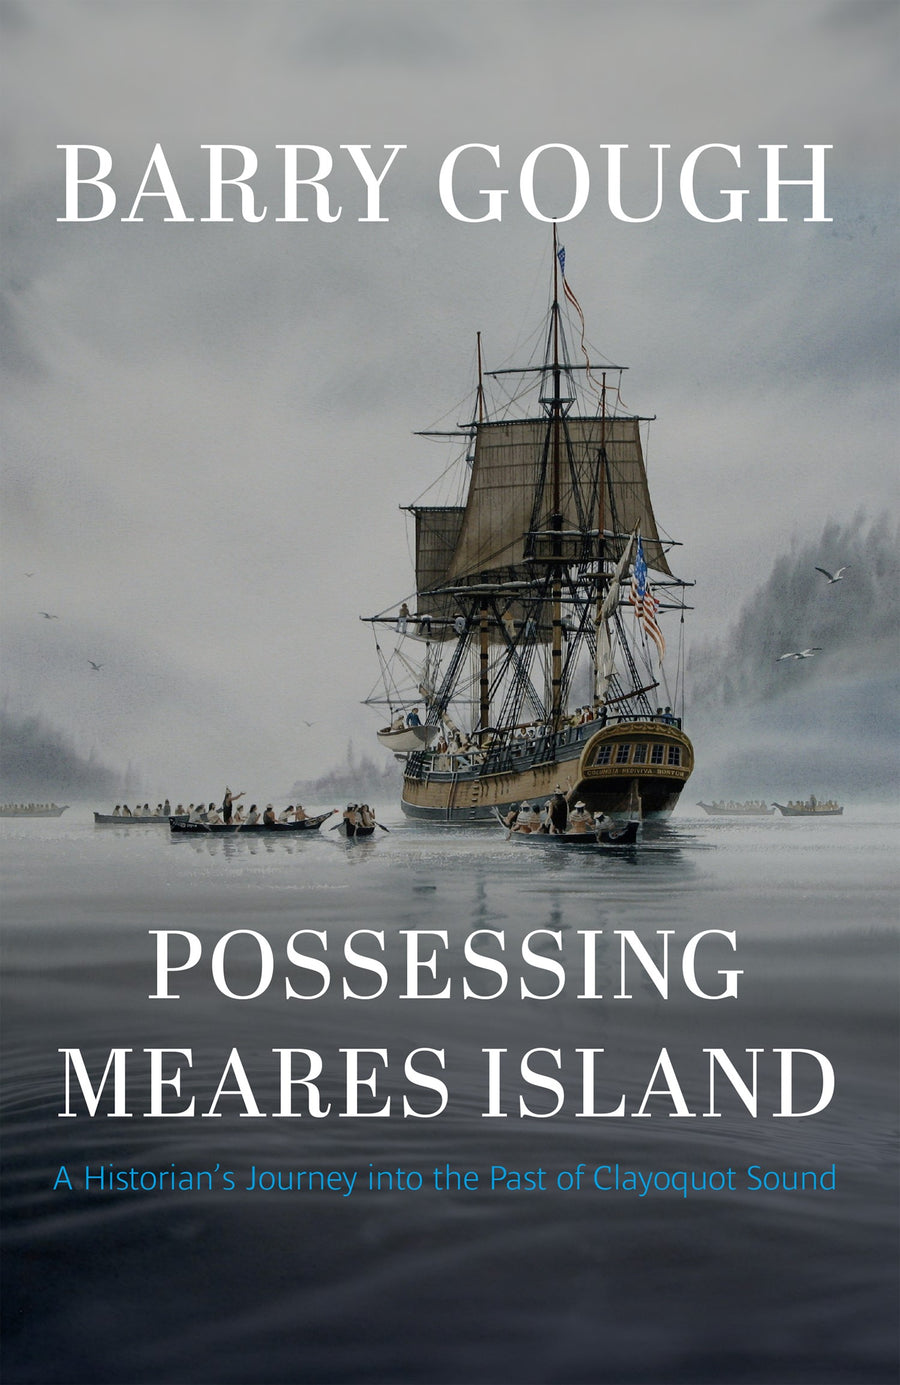 Possessing Meares Island : A Historian's Journey into the Past of Clayoquot Sound